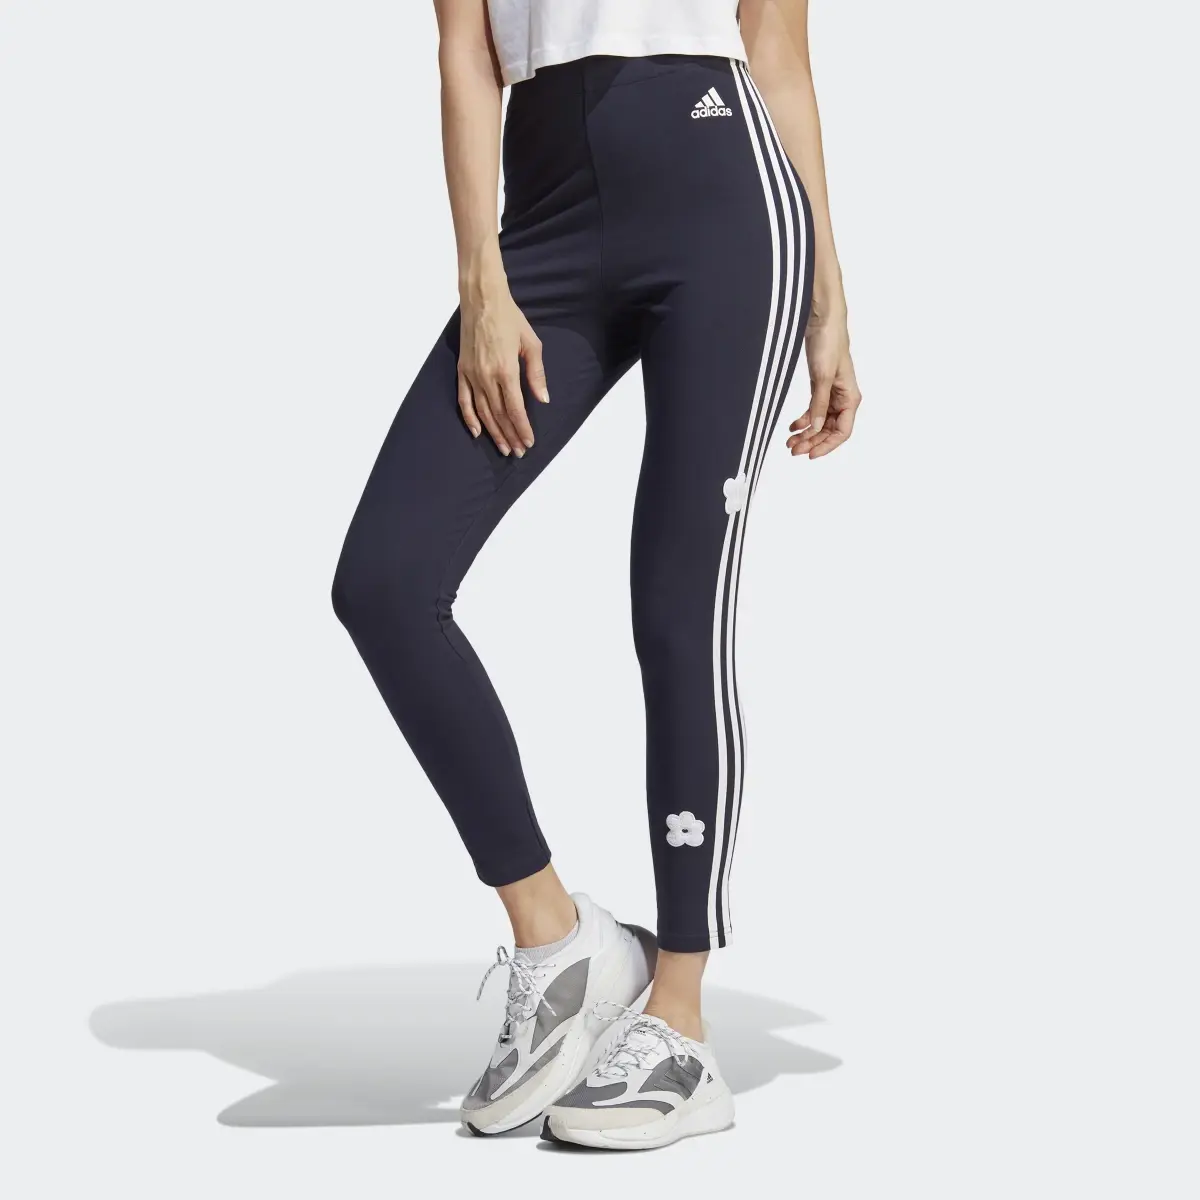 Adidas Leggings 3-Stripes High-Rise Cotton With Chenille Flower Patches. 1